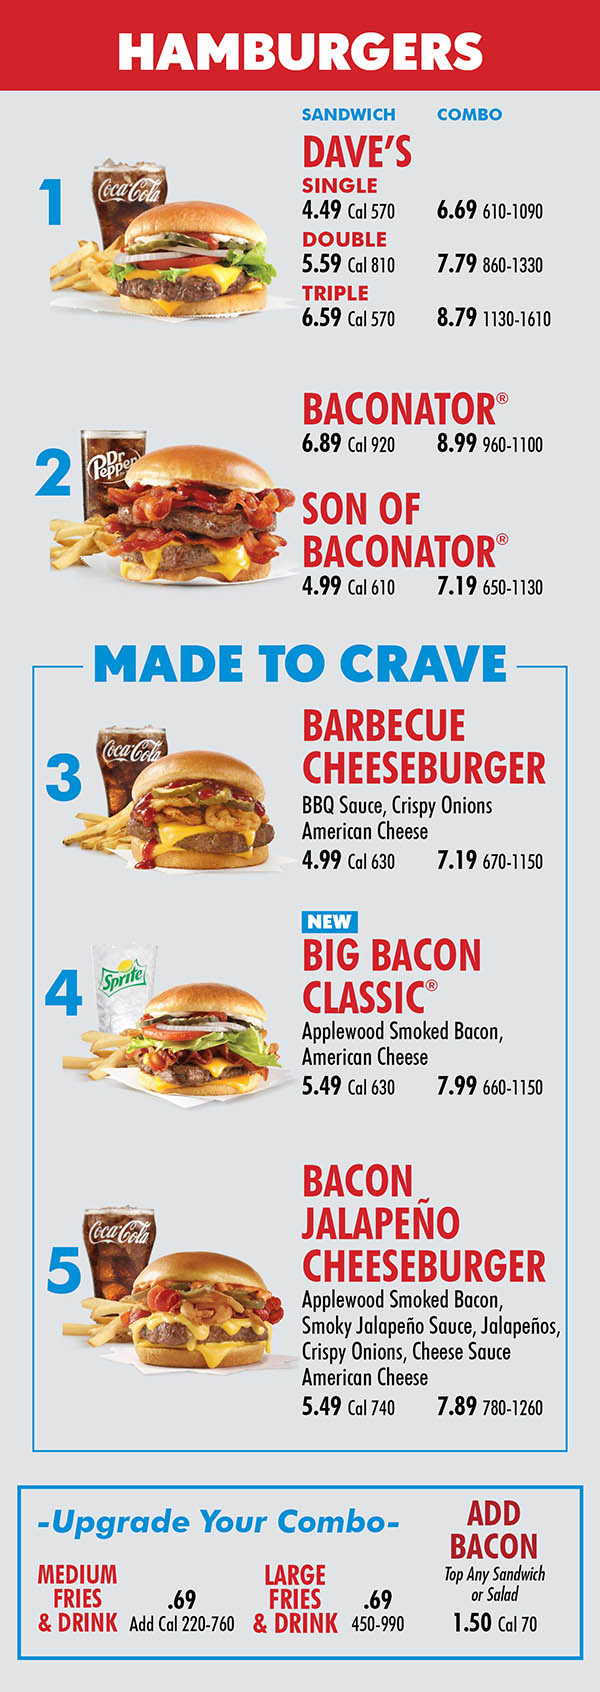 Wendy's Menu N 84th St Lincoln NE Page 1
HAMBURGERS
SANDWICH COMBO
DAVE’S
SINGLE
4.49 Cal 570 6.69 610-1090
DOUBLE
5.59 Cal 810 7.79 860-1330
TRIPLE
6.59 Cal 570 8.79 1130-1610
BACONATOR®
6.89 Cal 920 8.99 960-1100
SON OF
BACONATOR®
4.99 Cal 610 7.19 650-1130
BARBECUE
CHEESEBURGER
BBQ Sauce, Crispy Onions
American Cheese
4.99 Cal 630 7.19 670-1150
BIG BACON
CLASSIC®
Applewood Smoked Bacon,
American Cheese
5.49 Cal 630 7.99 660-1150
BACON
JALAPEÑO
CHEESEBURGER
Applewood Smoked Bacon,
Smoky Jalapeño Sauce, Jalapeños,
Crispy Onions, Cheese Sauce
American Cheese
5.49 Cal 740 7.89 780-1260
1
2
MADE TO CRAVE
3
4
5
-Upgrade Your Combo-
ADD
BACON
MEDIUM
FRIES
& DRINK
LARGE
FRIES
& DRINK
.69
Add Cal 220-760
.69
450-990
Top Any Sandwich or Salad
1.50 Cal 70